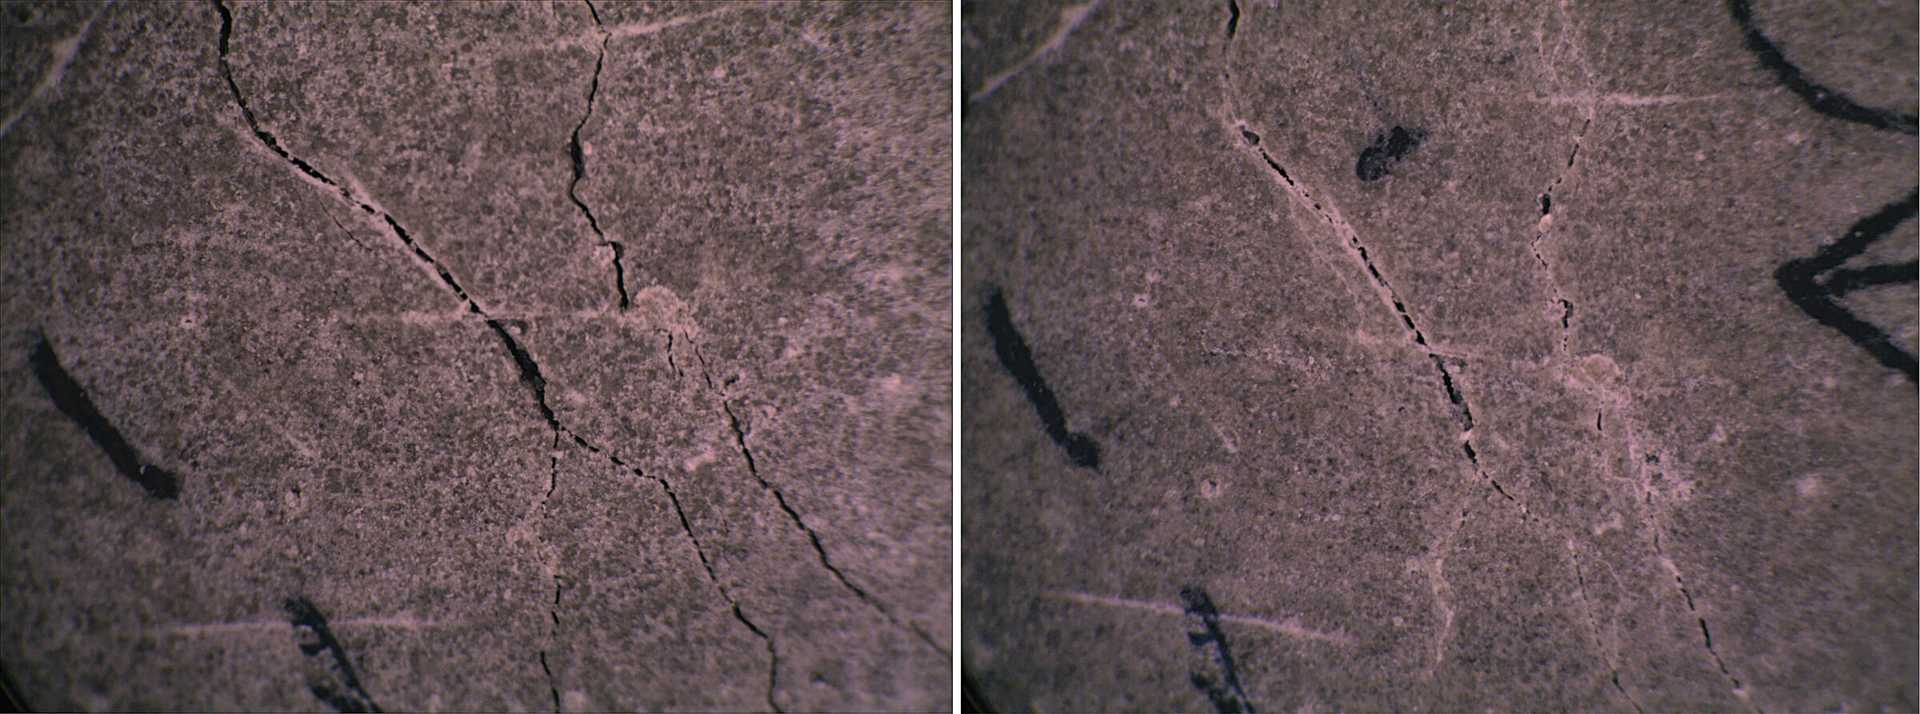 Before and after images of a self-healing concrete material with sealed cracks.